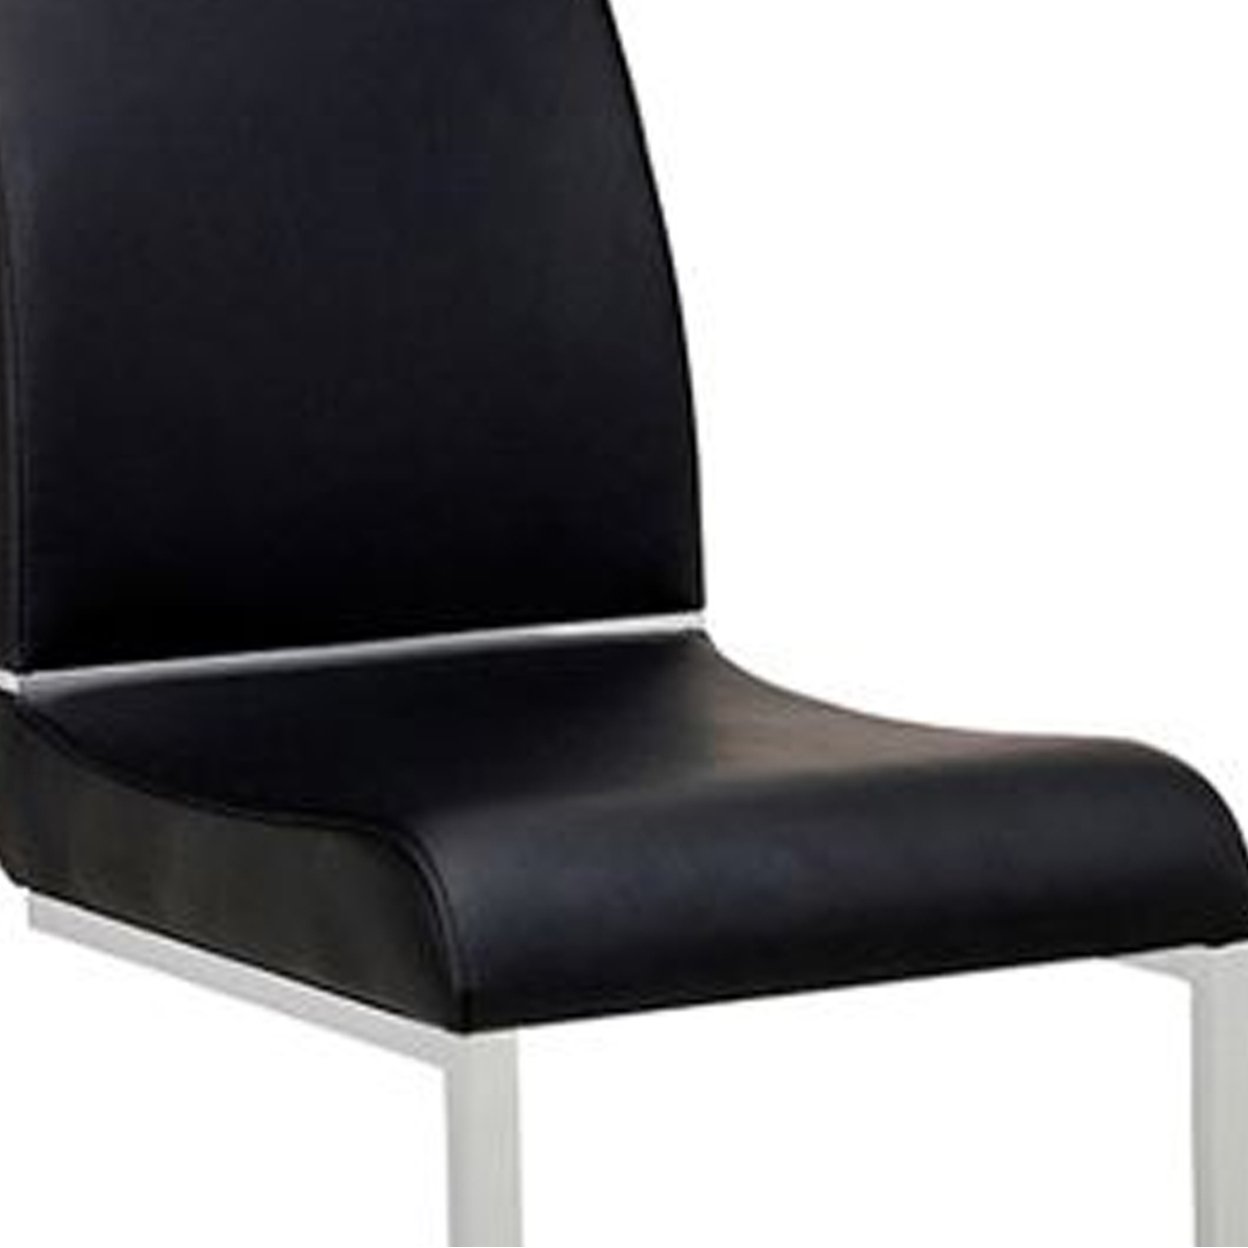 Stainless Steel Chair With Faux Leather Upholstery, Set Of Two, Black And Silver- Saltoro Sherpi